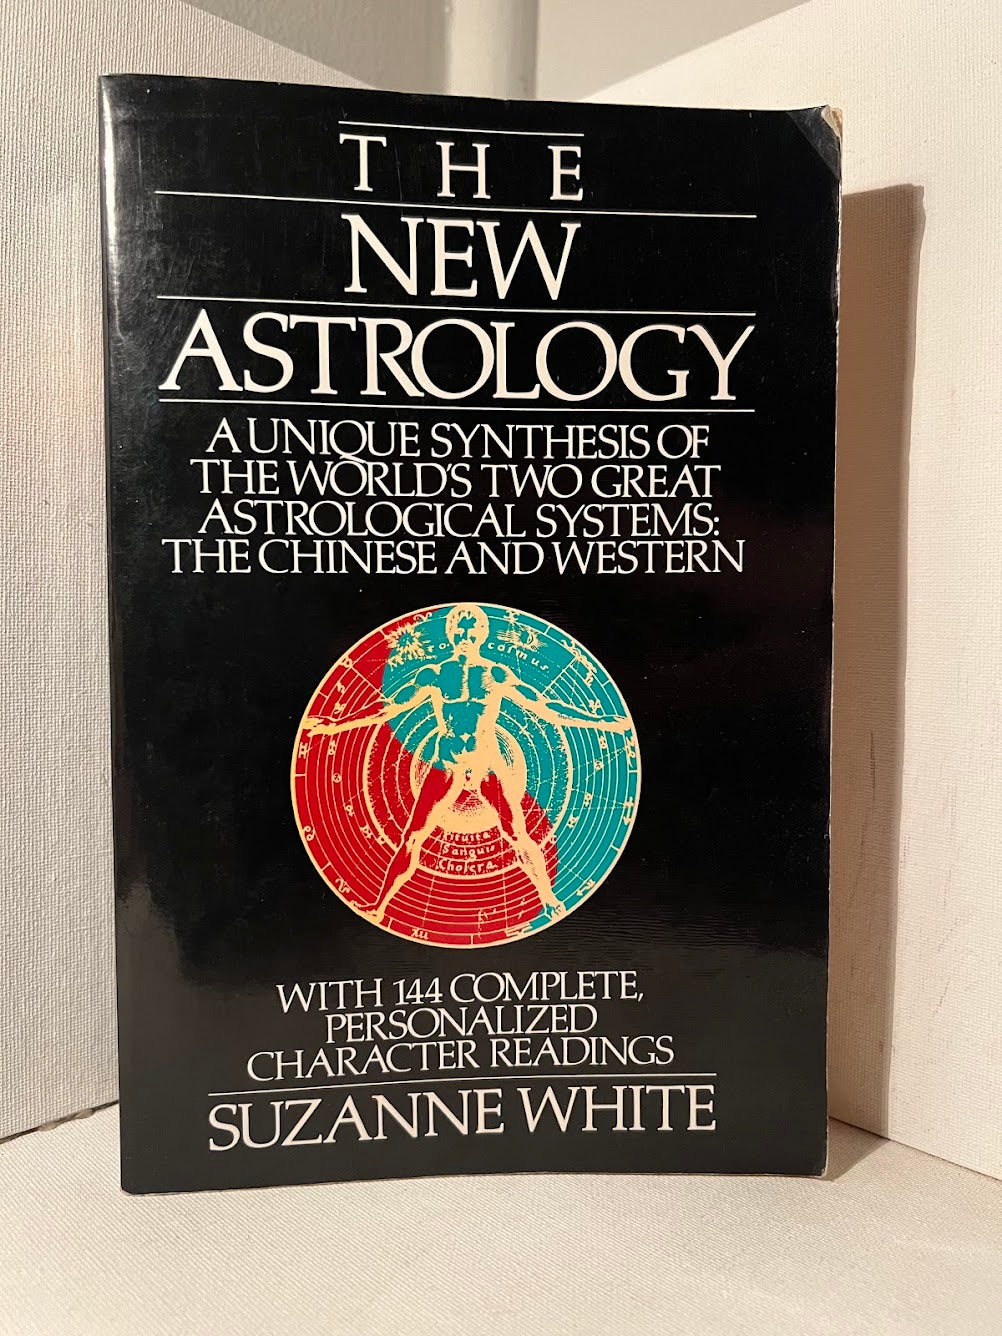 The New Astrology by Suzanne White